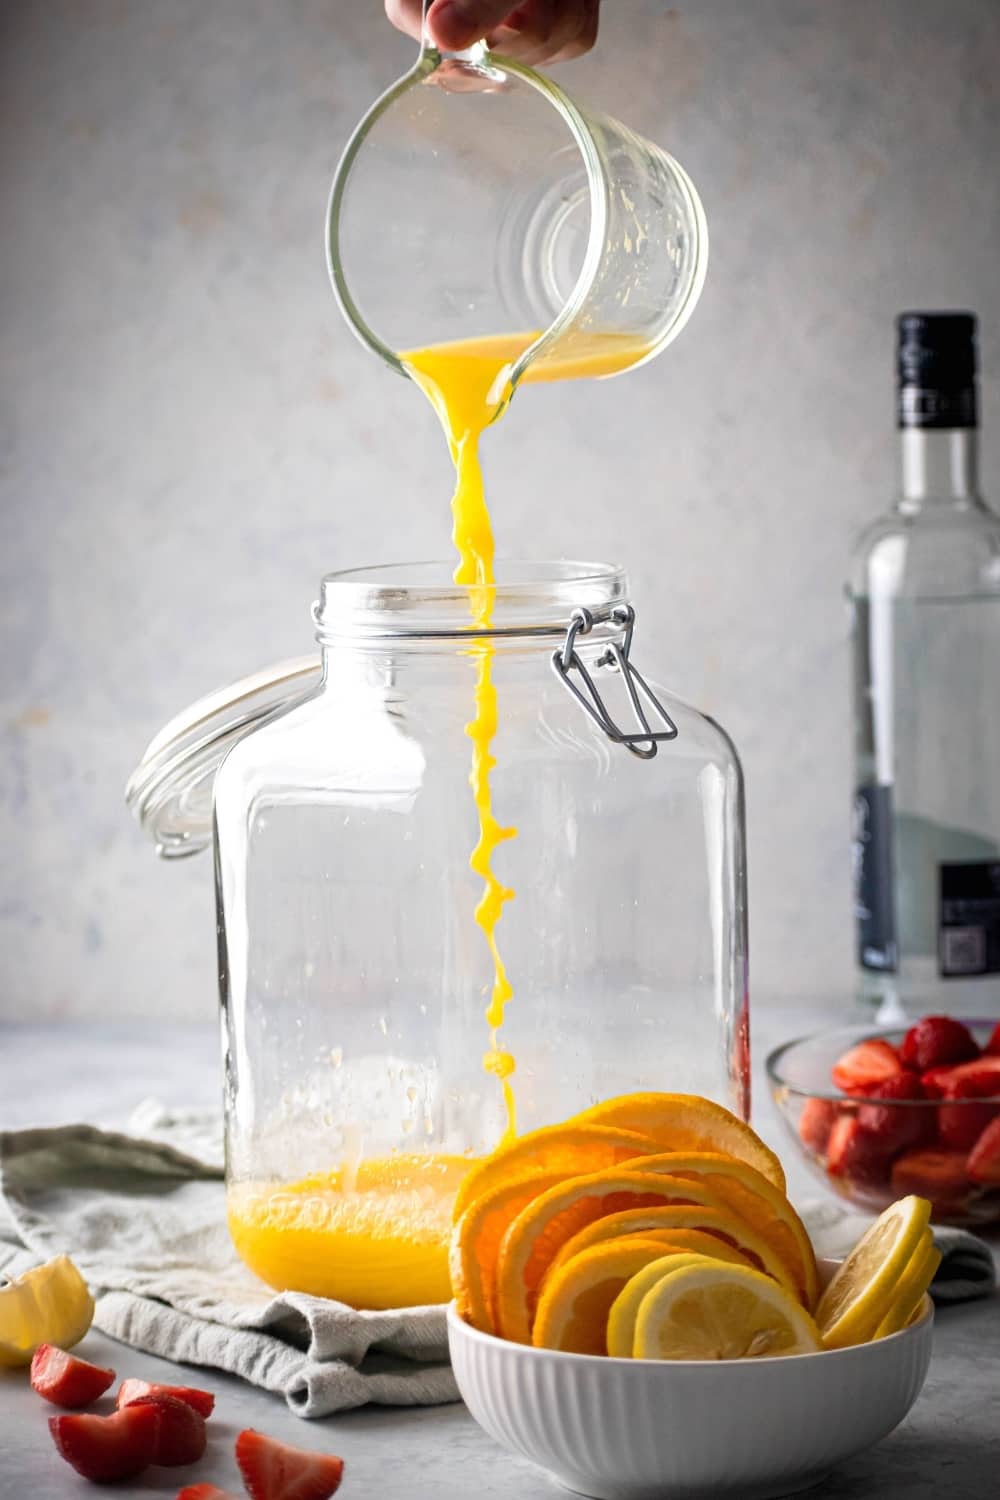 An empty glass gallon dispenser. A hand is pouring a cup of orange juice into it. In front of the dispenser is a small white bowl with orange slices and next to dispenser is a small glass bowl of sliced strawberries, behind the strawberries as a bottle of vodka.